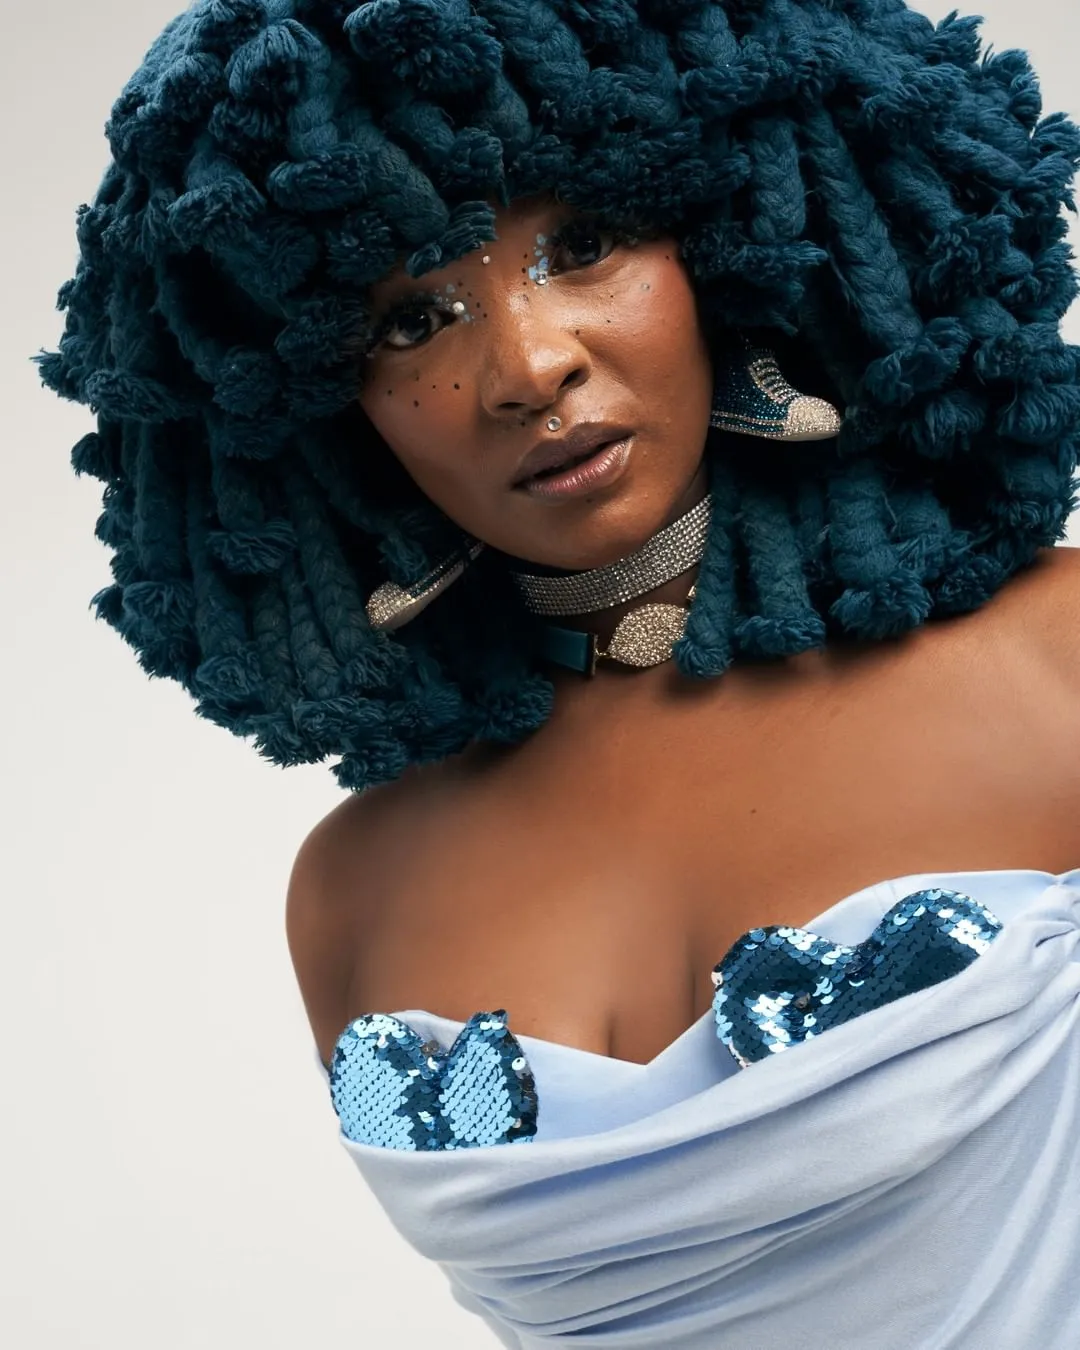 Moonchild Sanelly opens up about her mental health